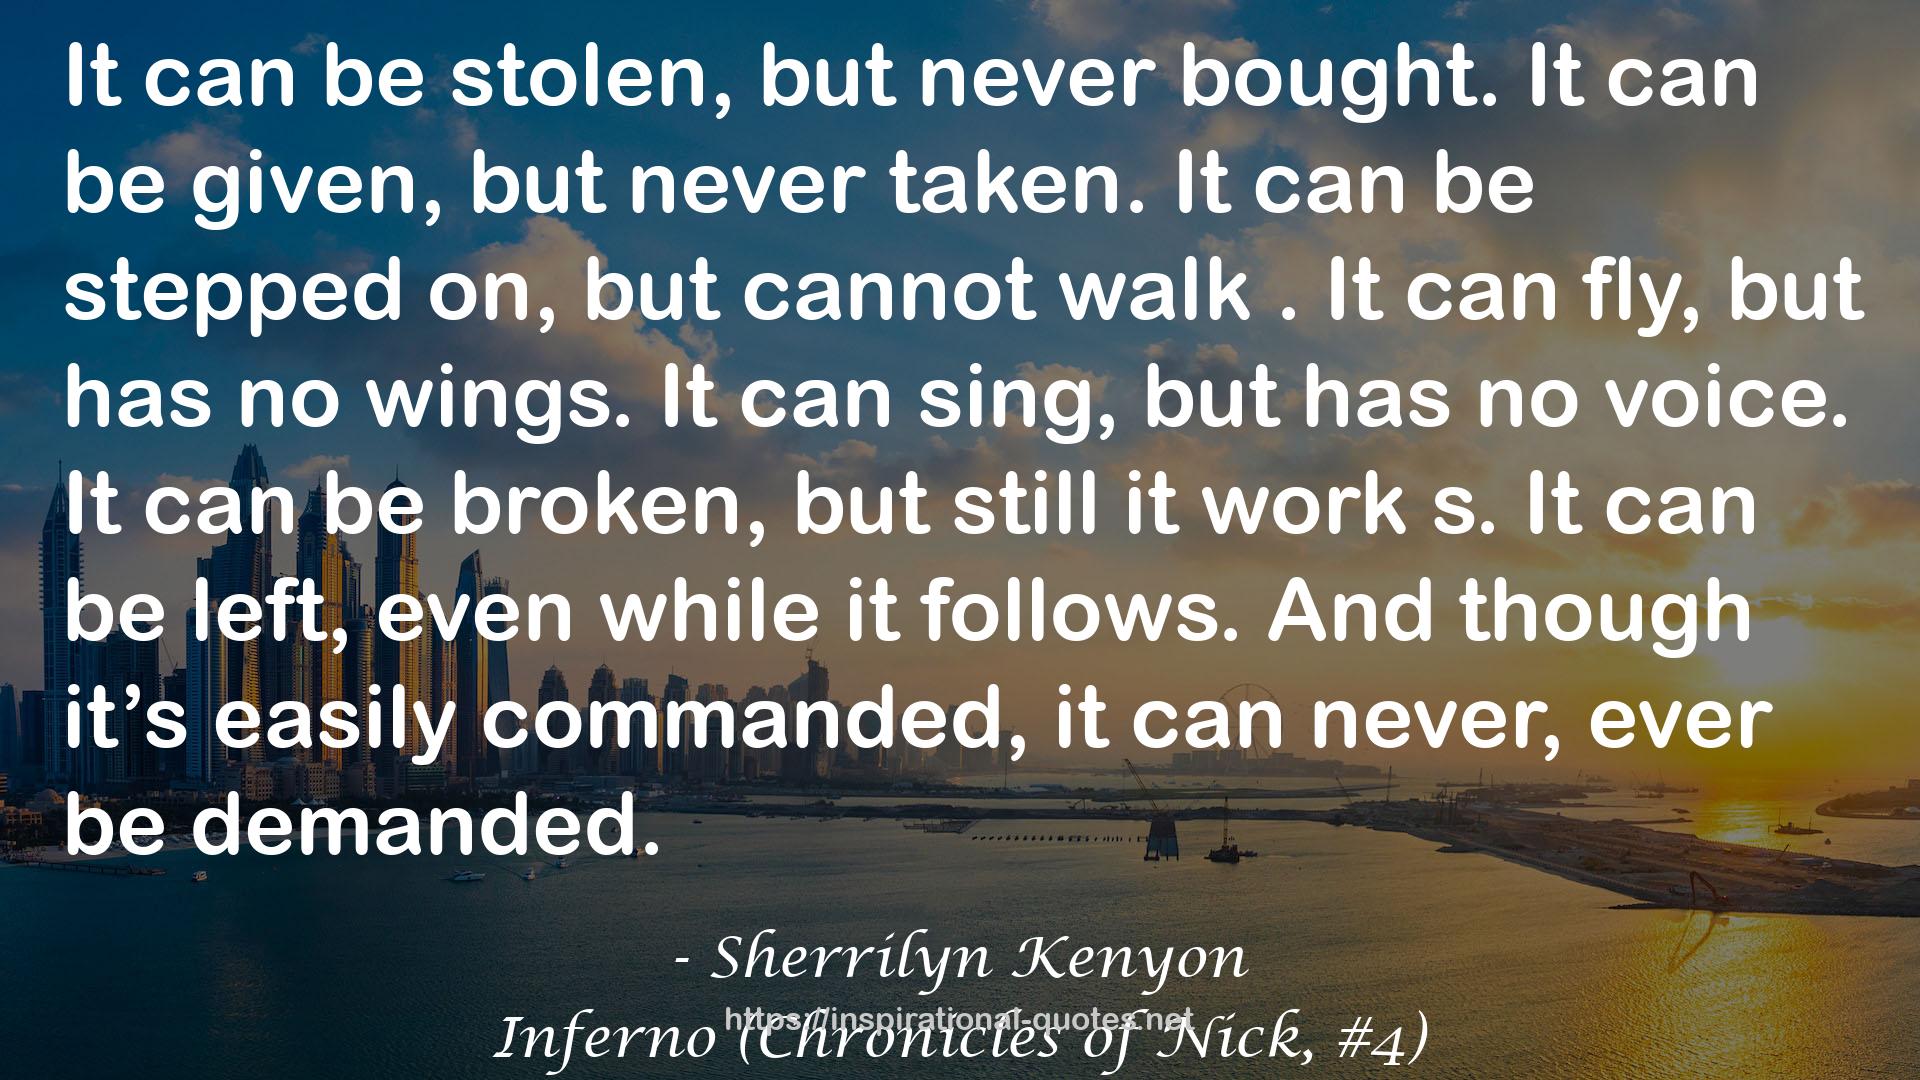 Inferno (Chronicles of Nick, #4) QUOTES